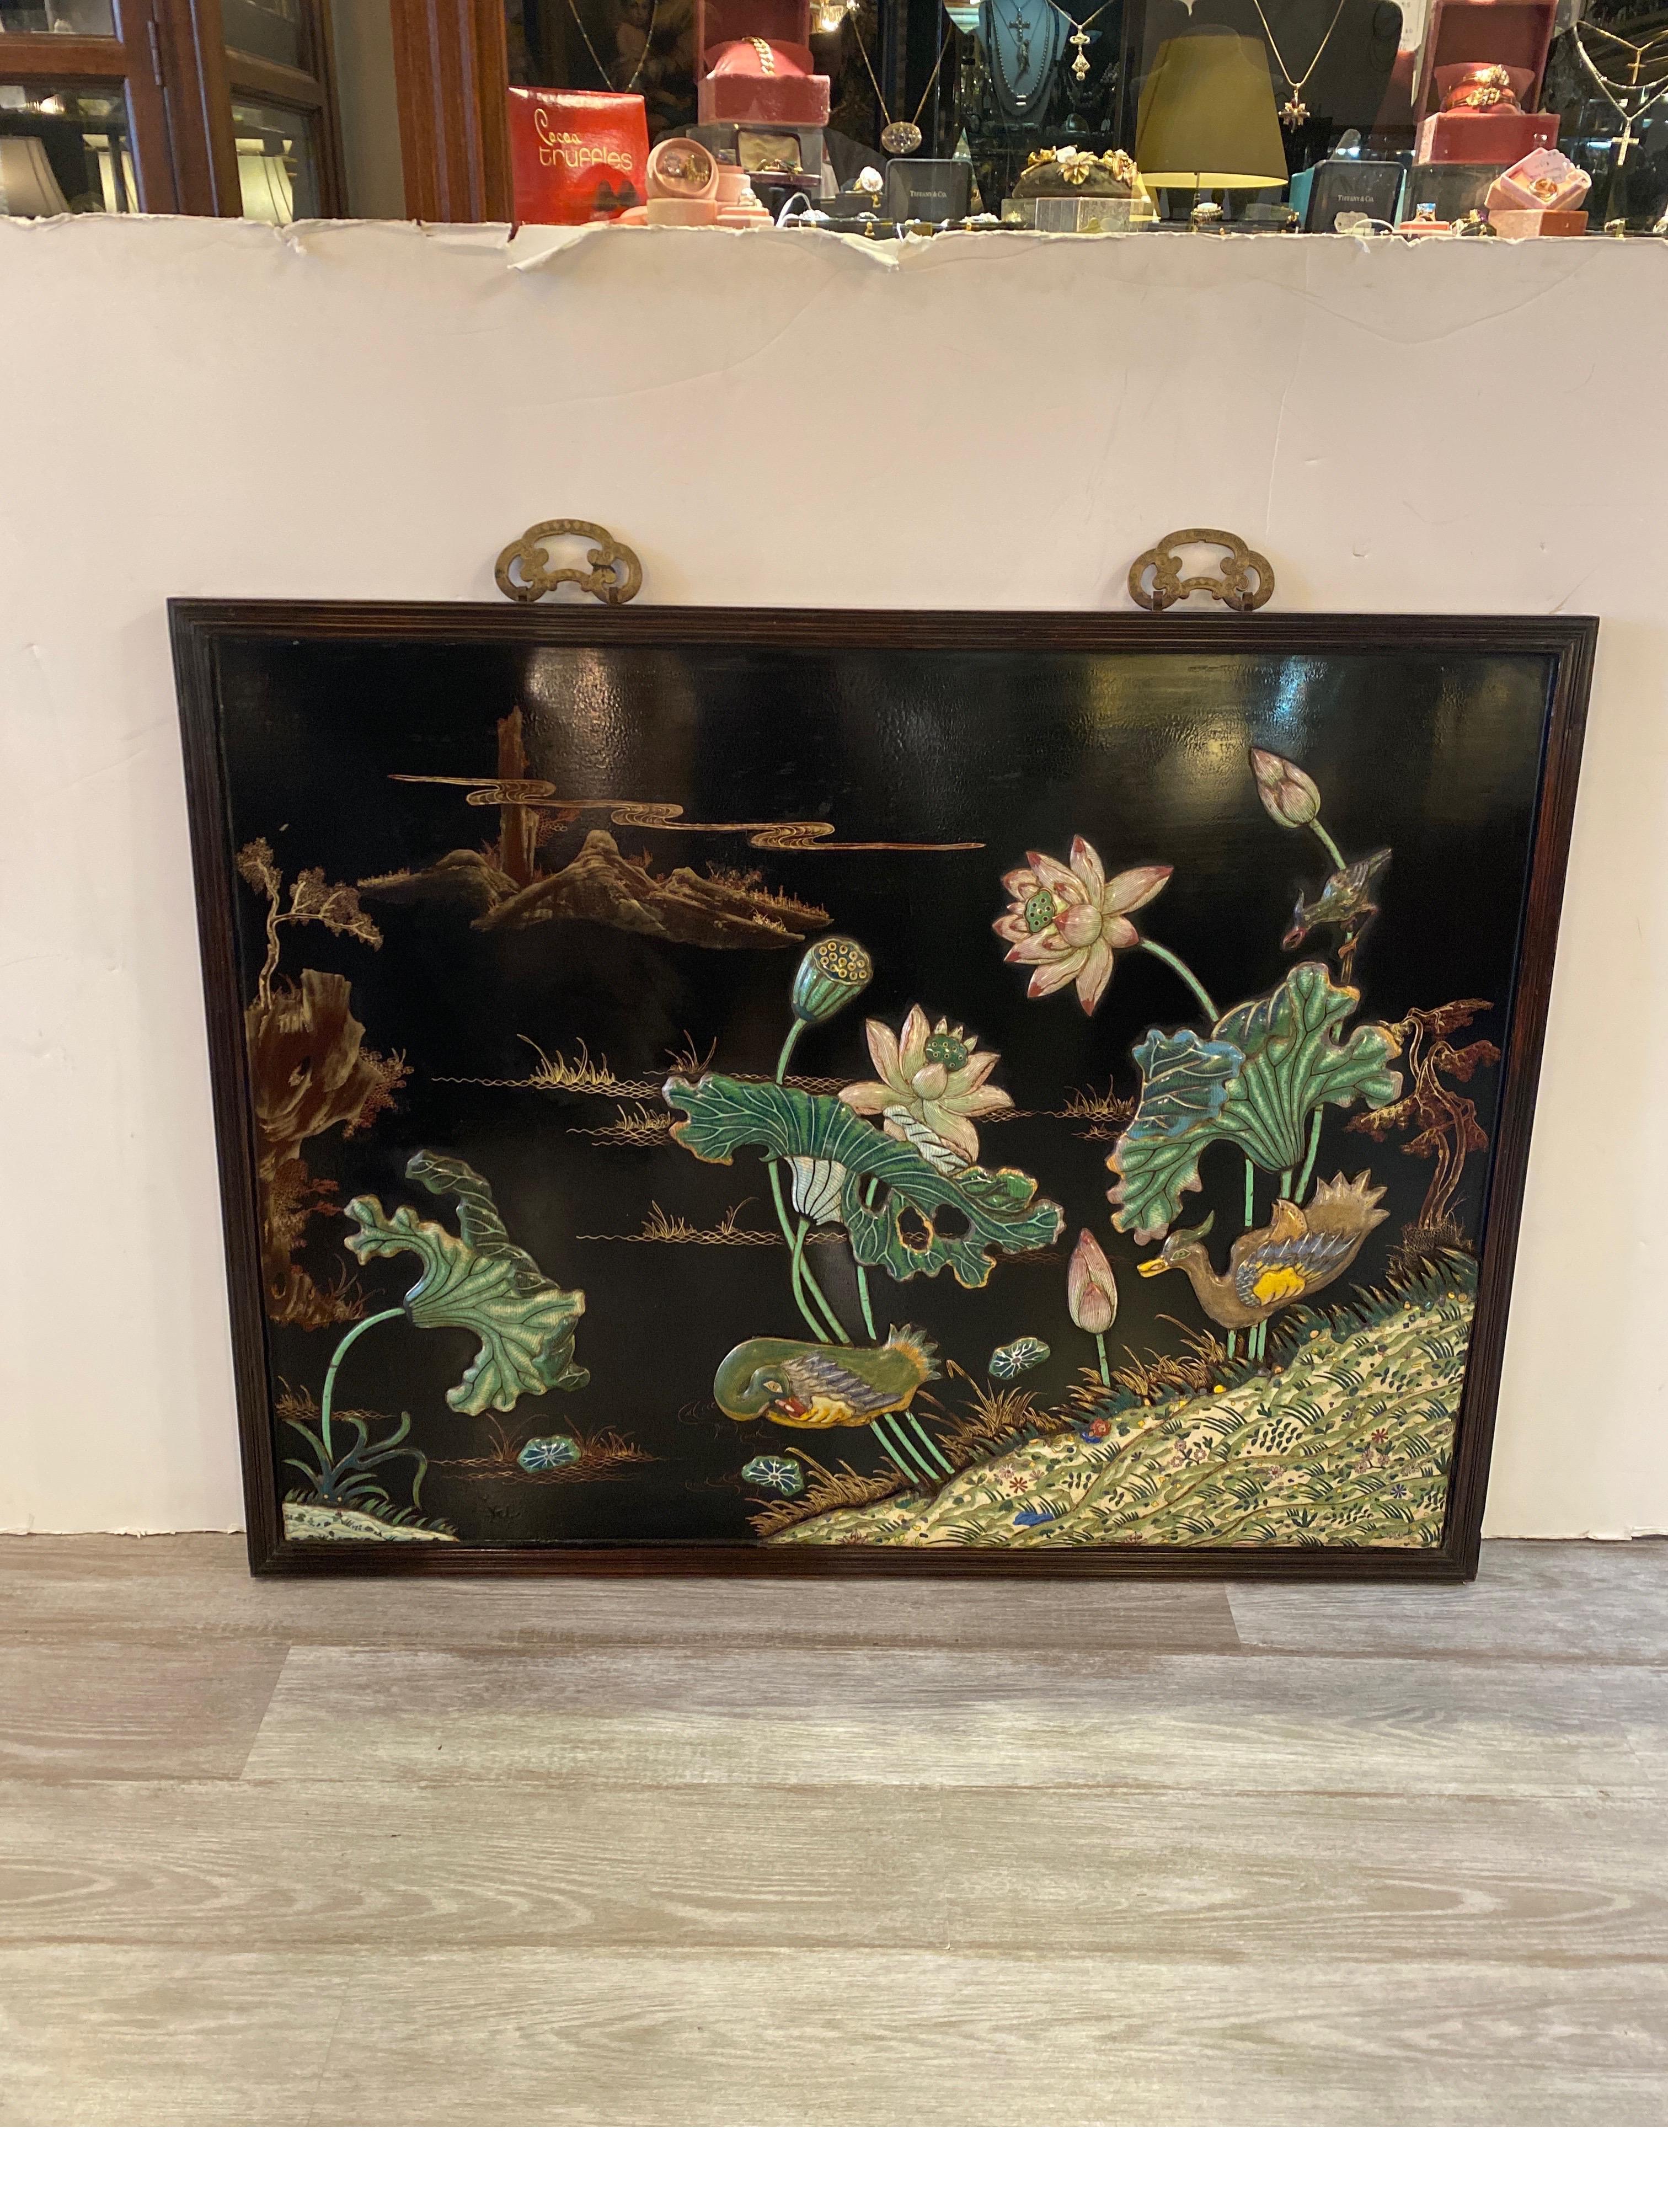 Exceptional chines lacquered panel with enameled chinoiserie mounts depicting stylized ducks with water lilies almost three dimensional. The black background with a walnut color frame.